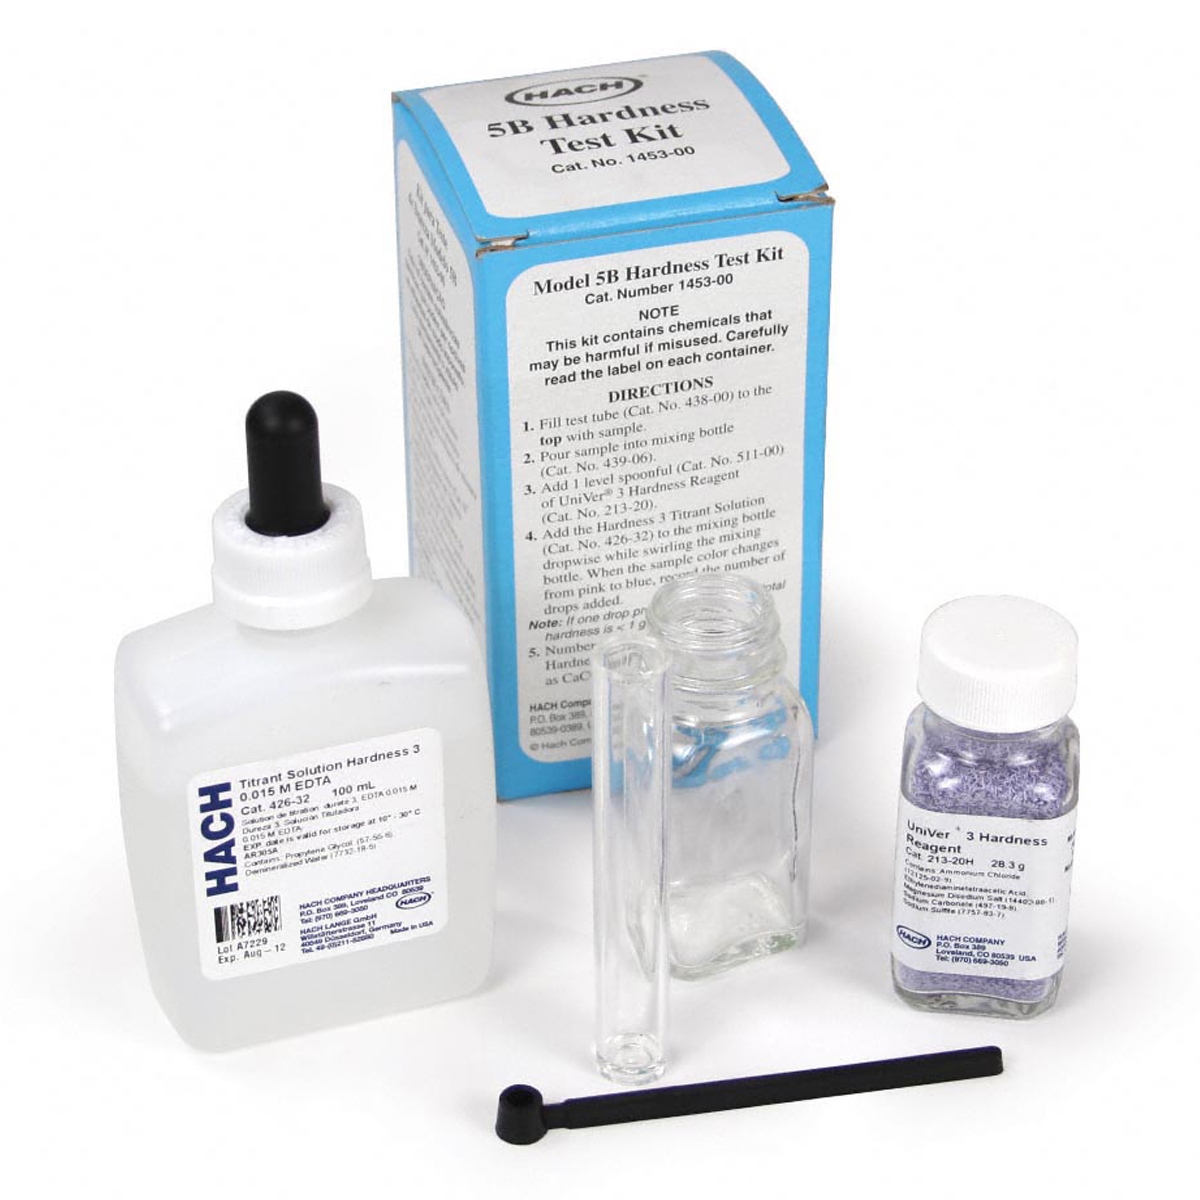 Hach Drop Count Hardness Test Kit 8492